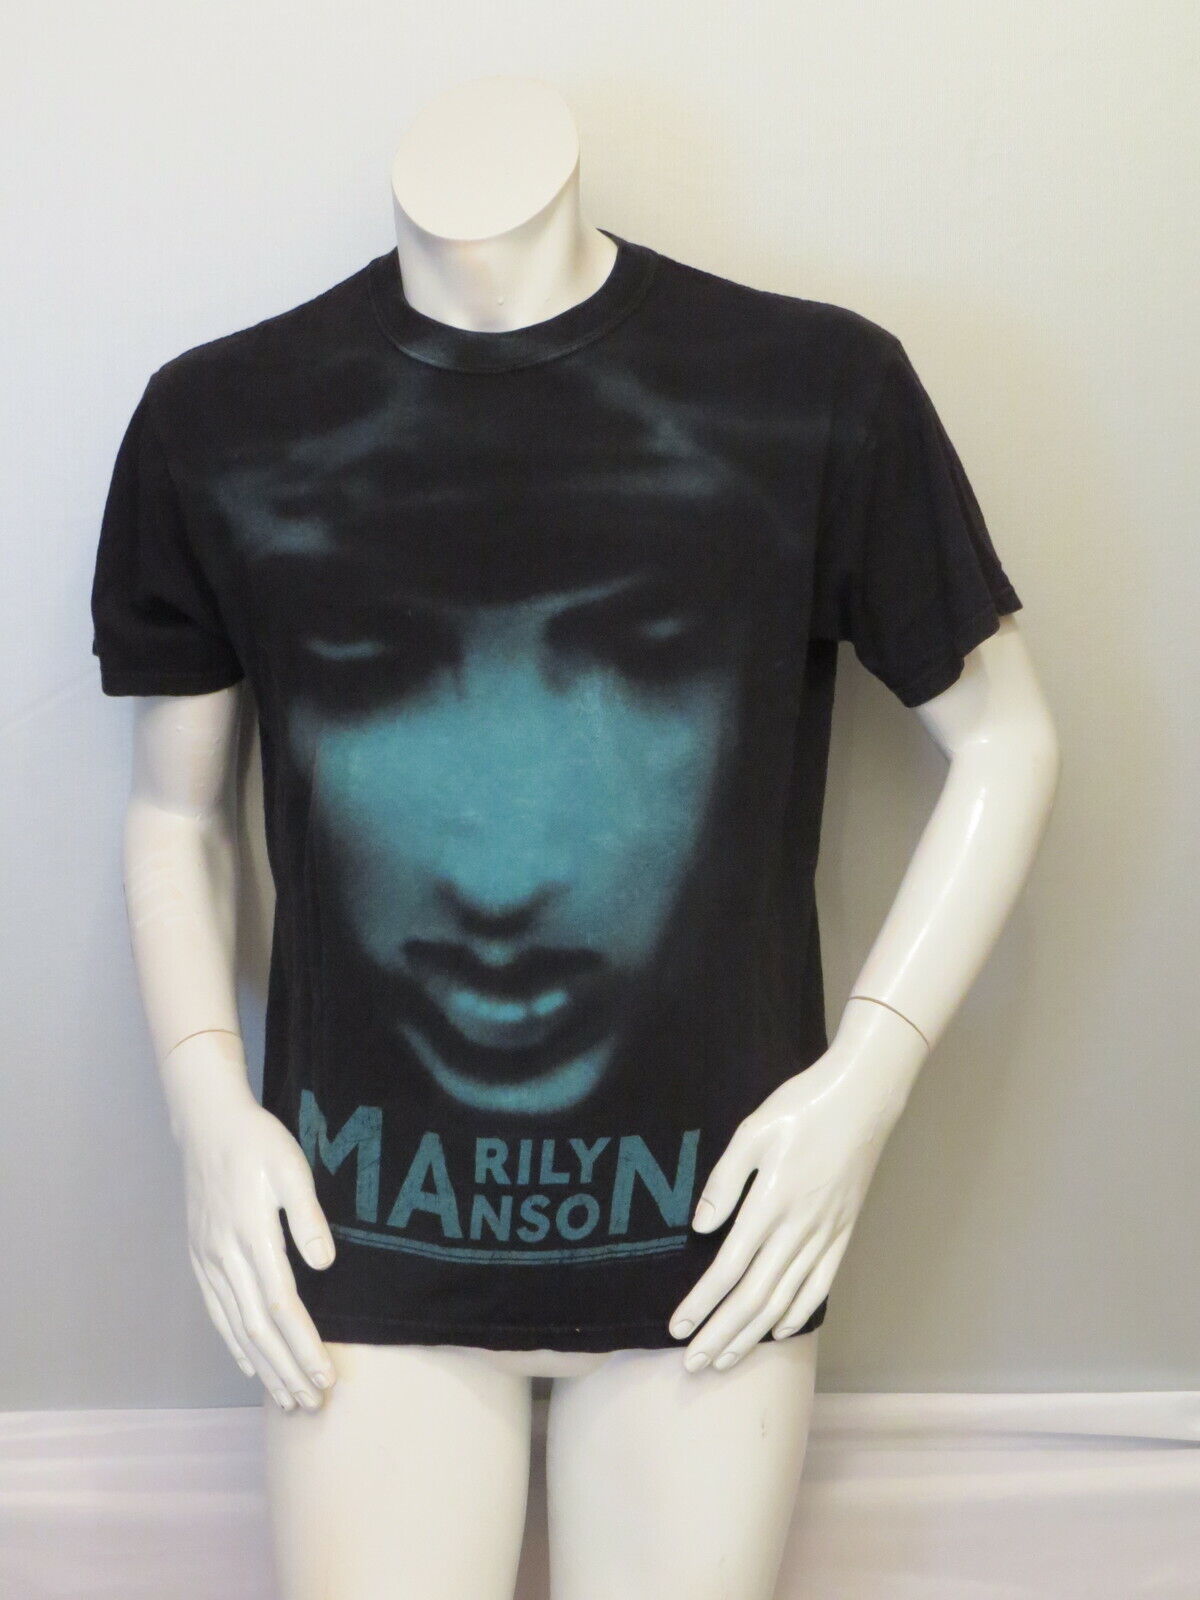 Marilyn Manson Tour Shirt - 2009 Canadian Tour And Norther Usa - Men's Large